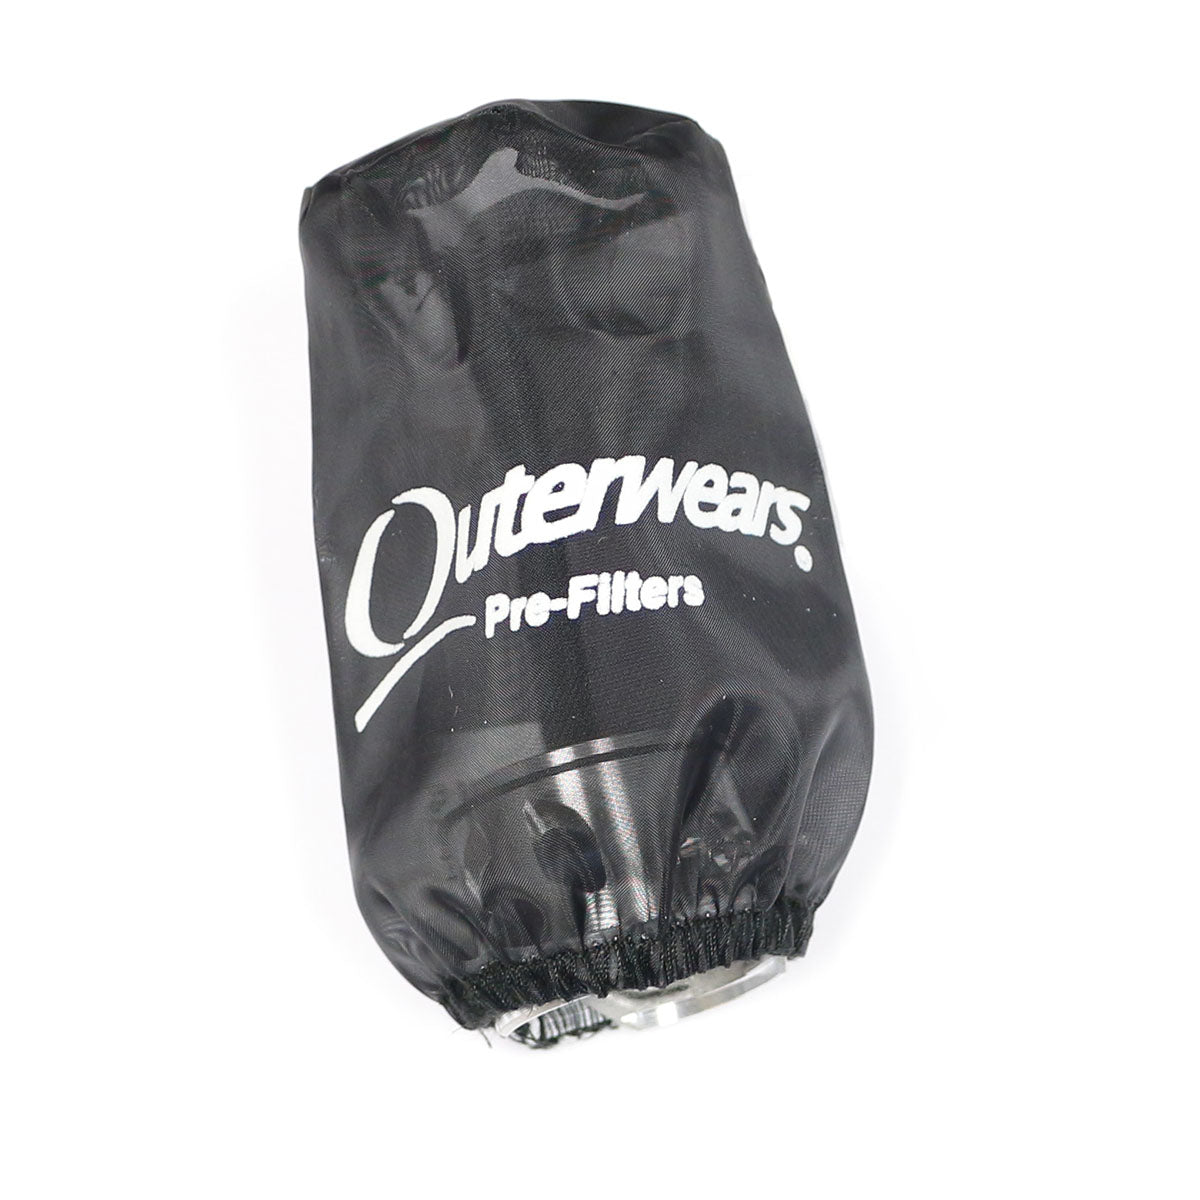 Outerwears: Pre-Filter for DT1 Filter